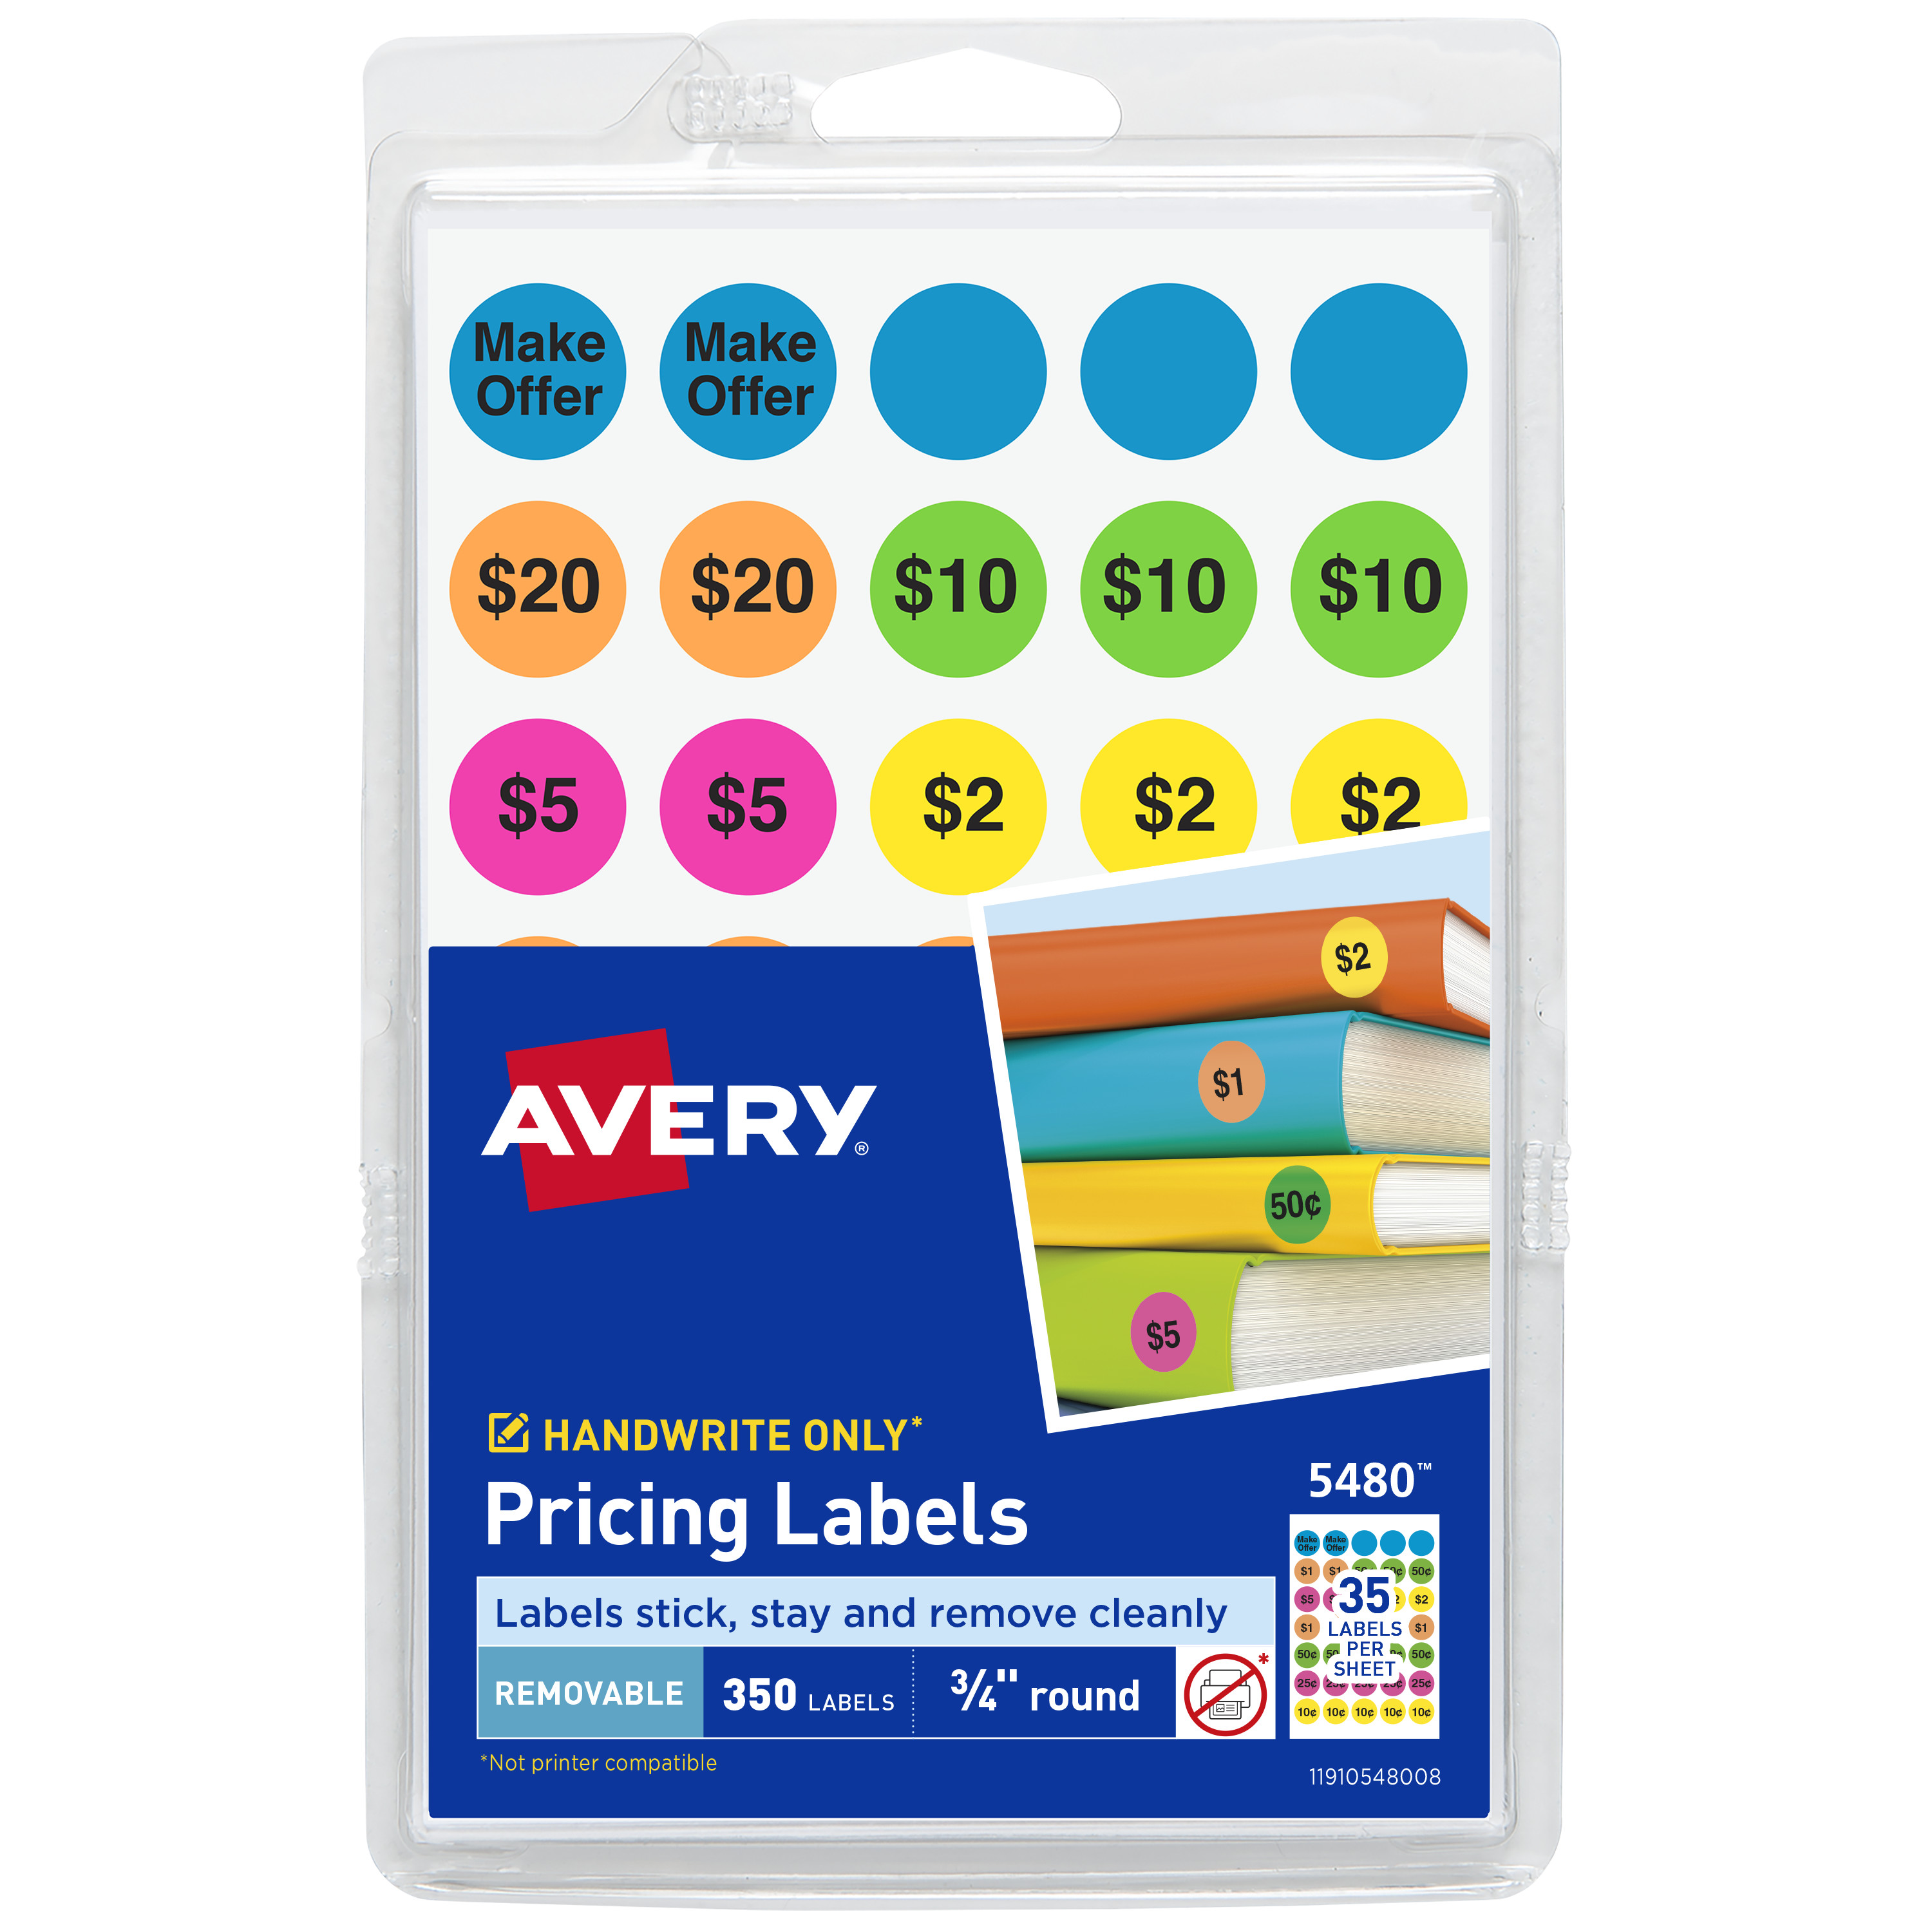 Avery Garage Sale Labels, 3/4" Round Stickers, Assorted Colors, Non-Printable, 350 Pricing Labels (5480) - image 1 of 5